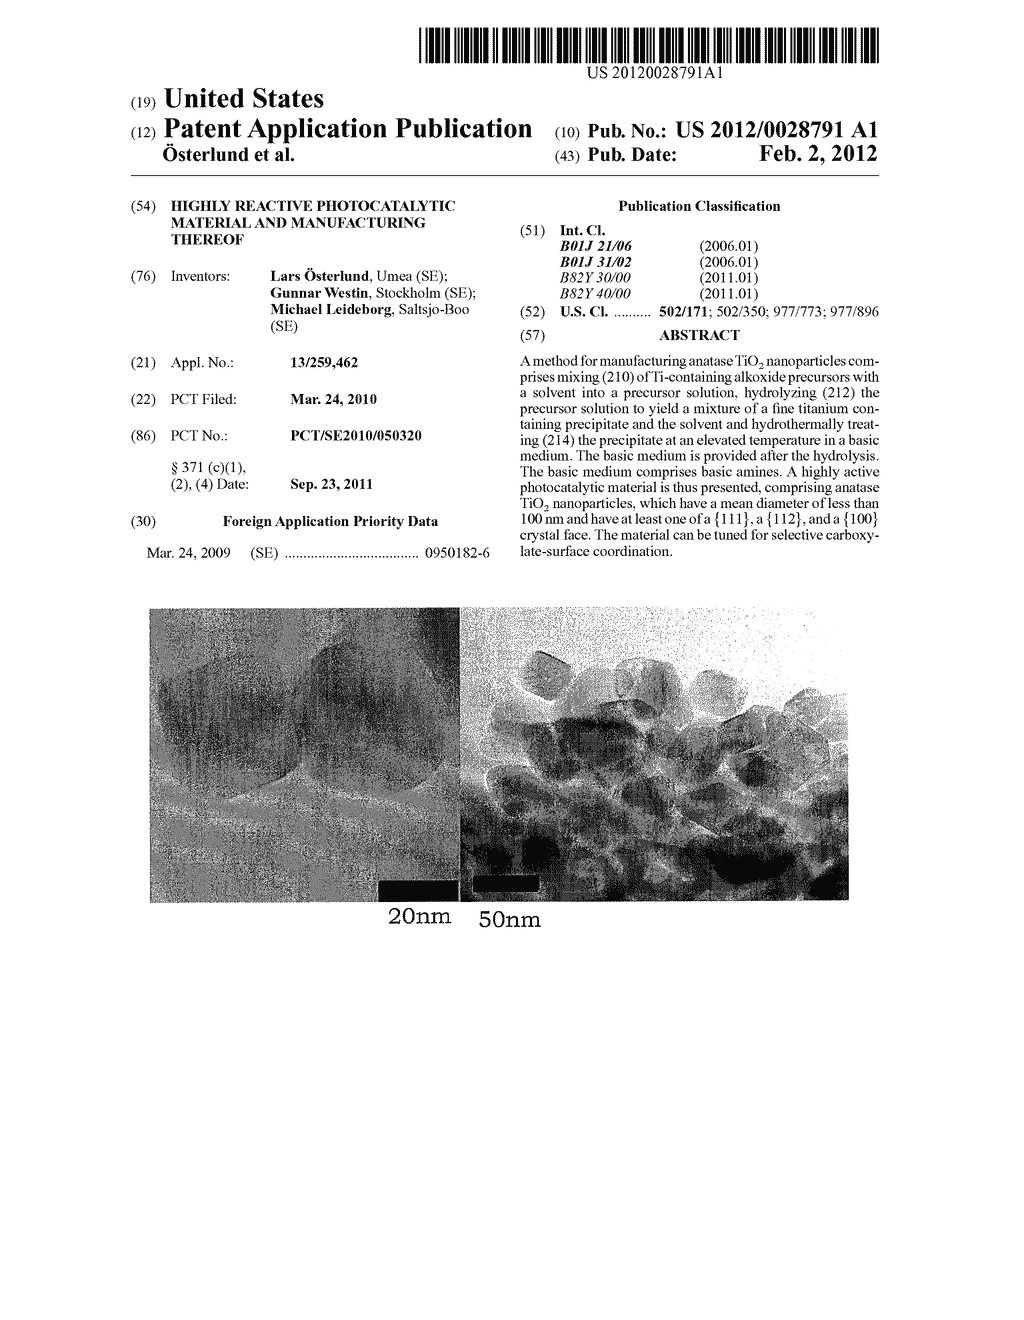 Highly Reactive Photocatalytic Material and Manufacturing Thereof - diagram, schematic, and image 01